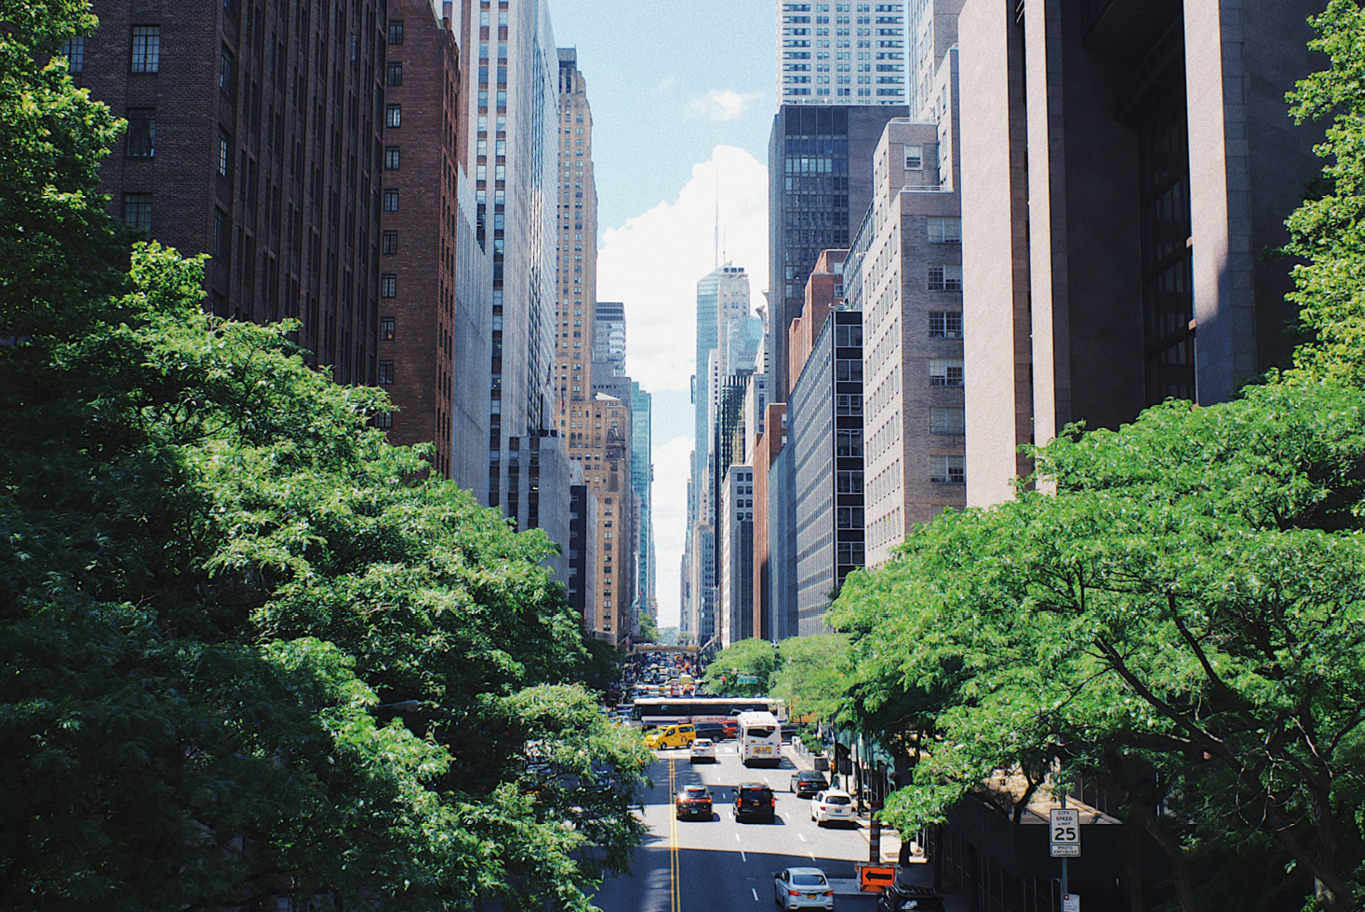 Canopy of big trees in large city with cars and large buildings in backdrop